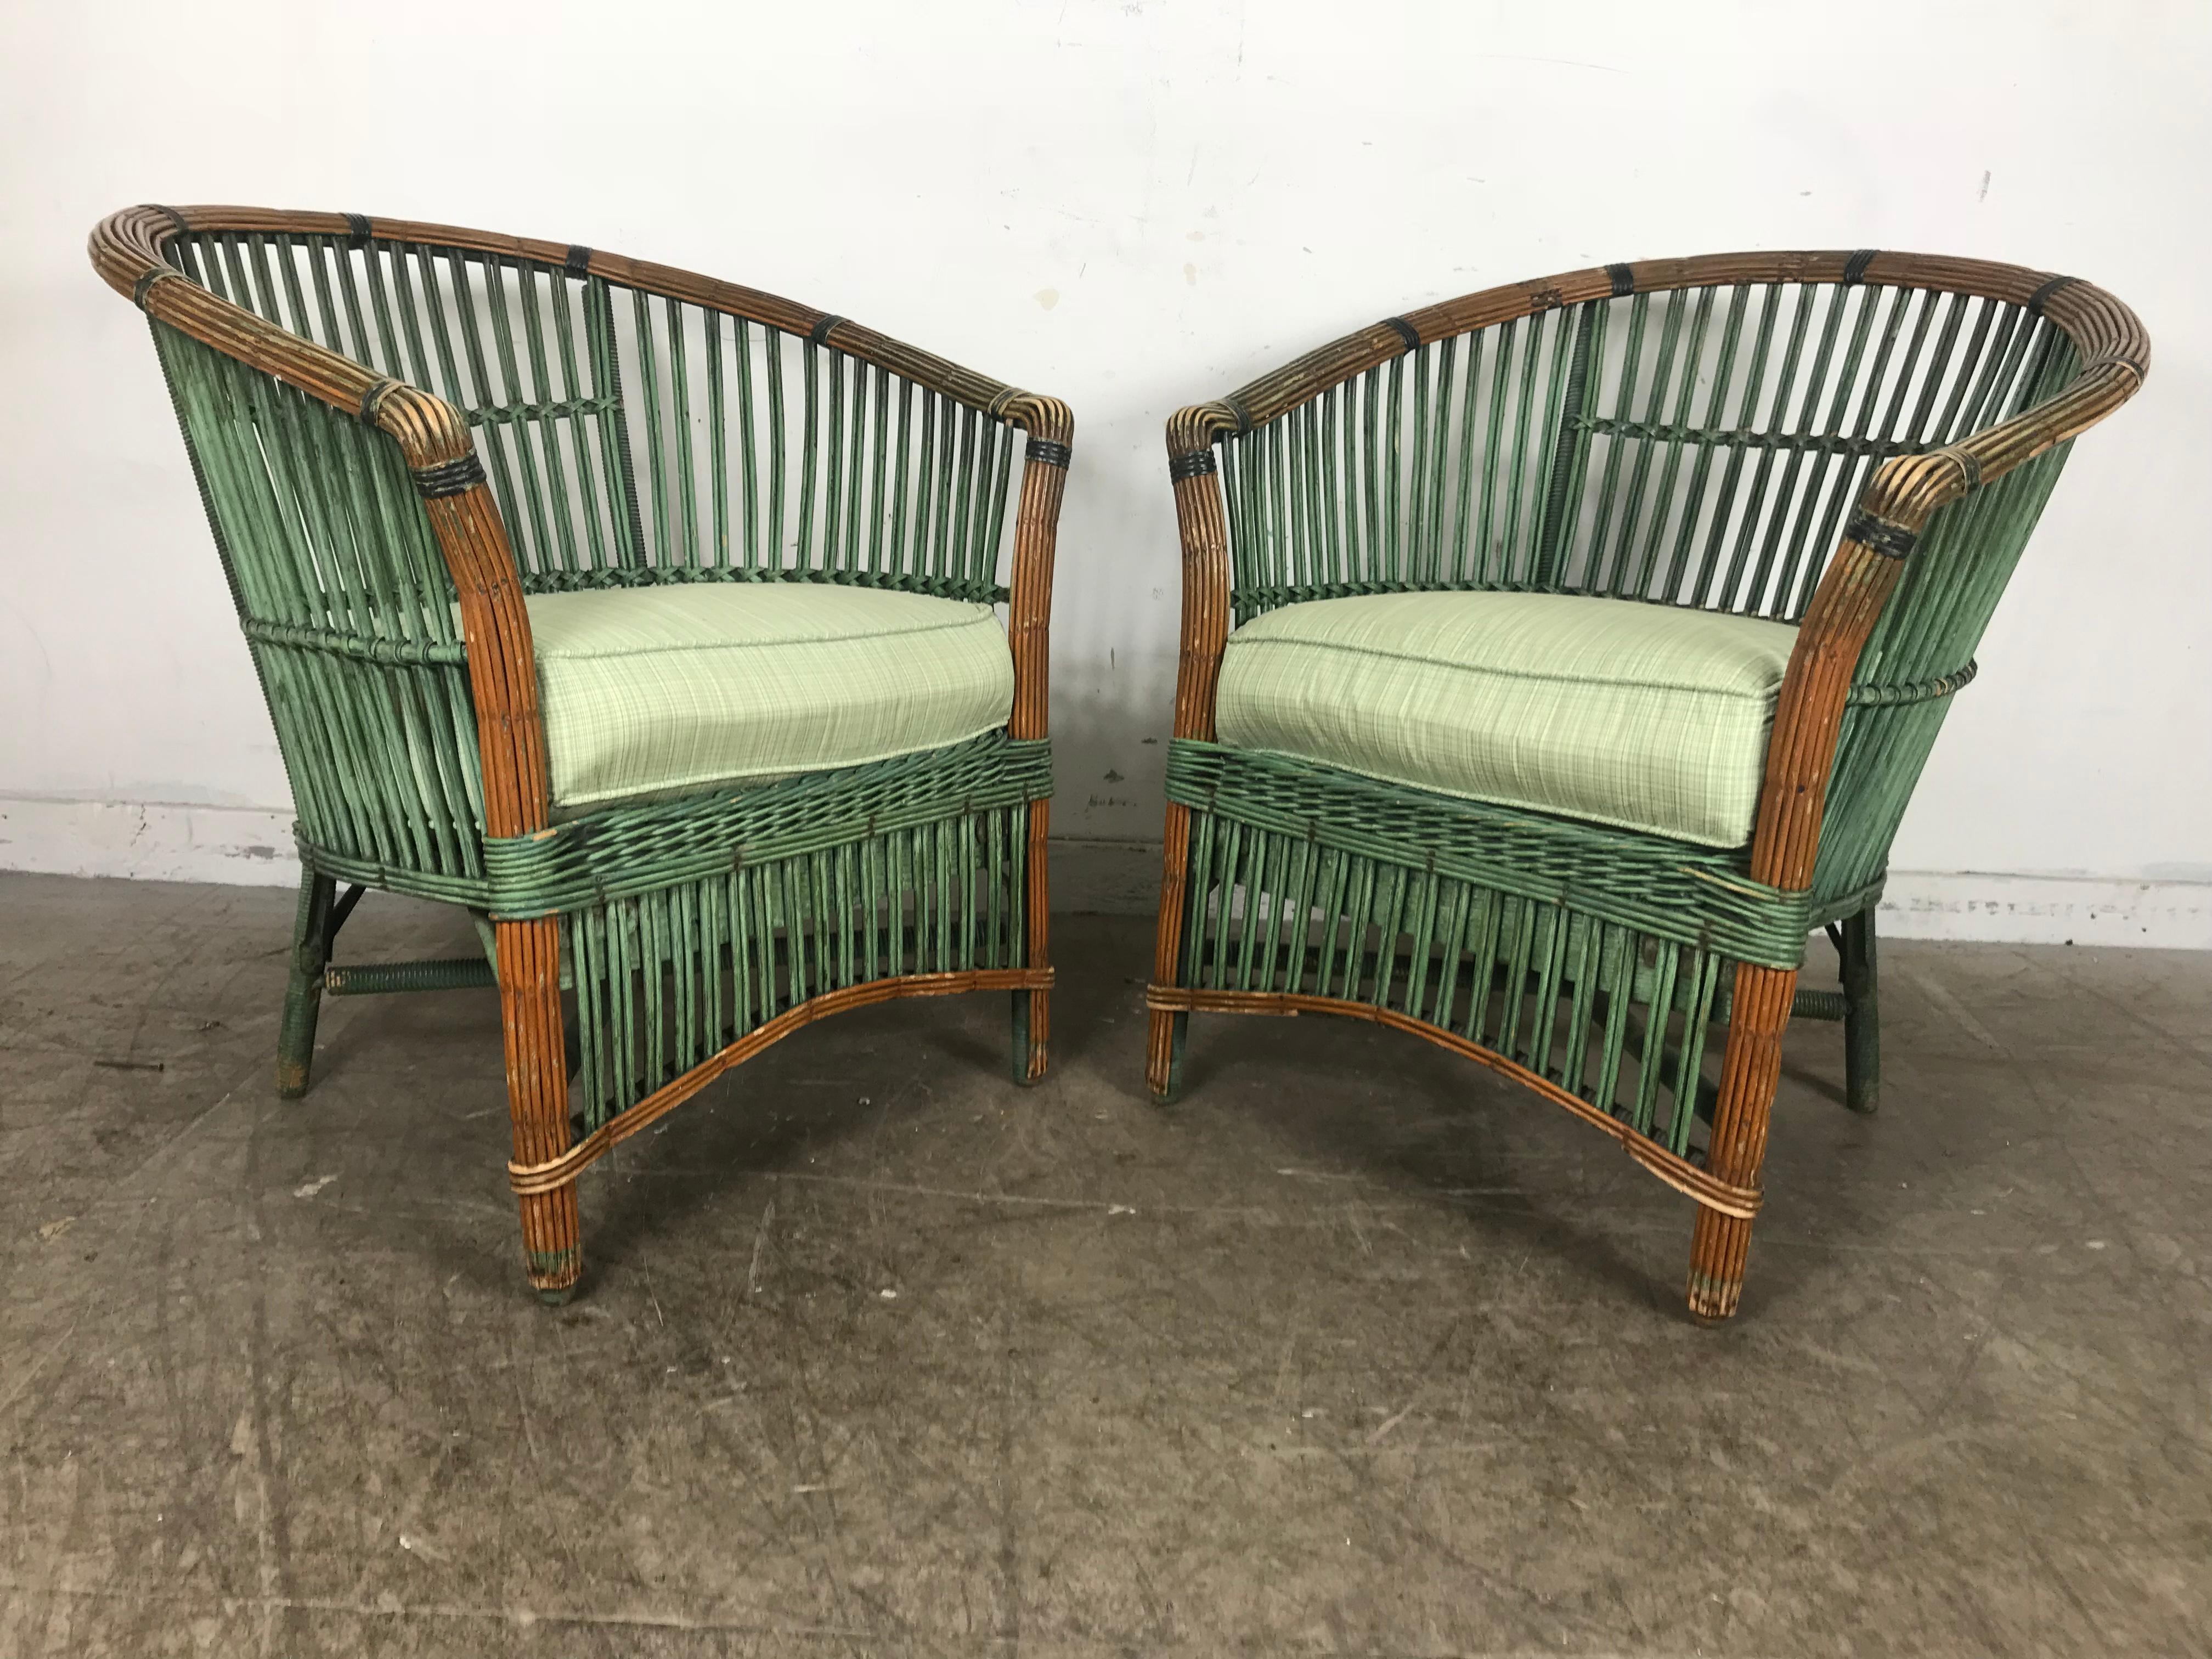 Pair of Art Deco split reed stick wicker lounge chairs, wonderful patina, great color, structurally sound. New down filled seat and back cushions, extremely comfortable, hand delivery avail to New York City or anywhere en route from Buffalo NY.